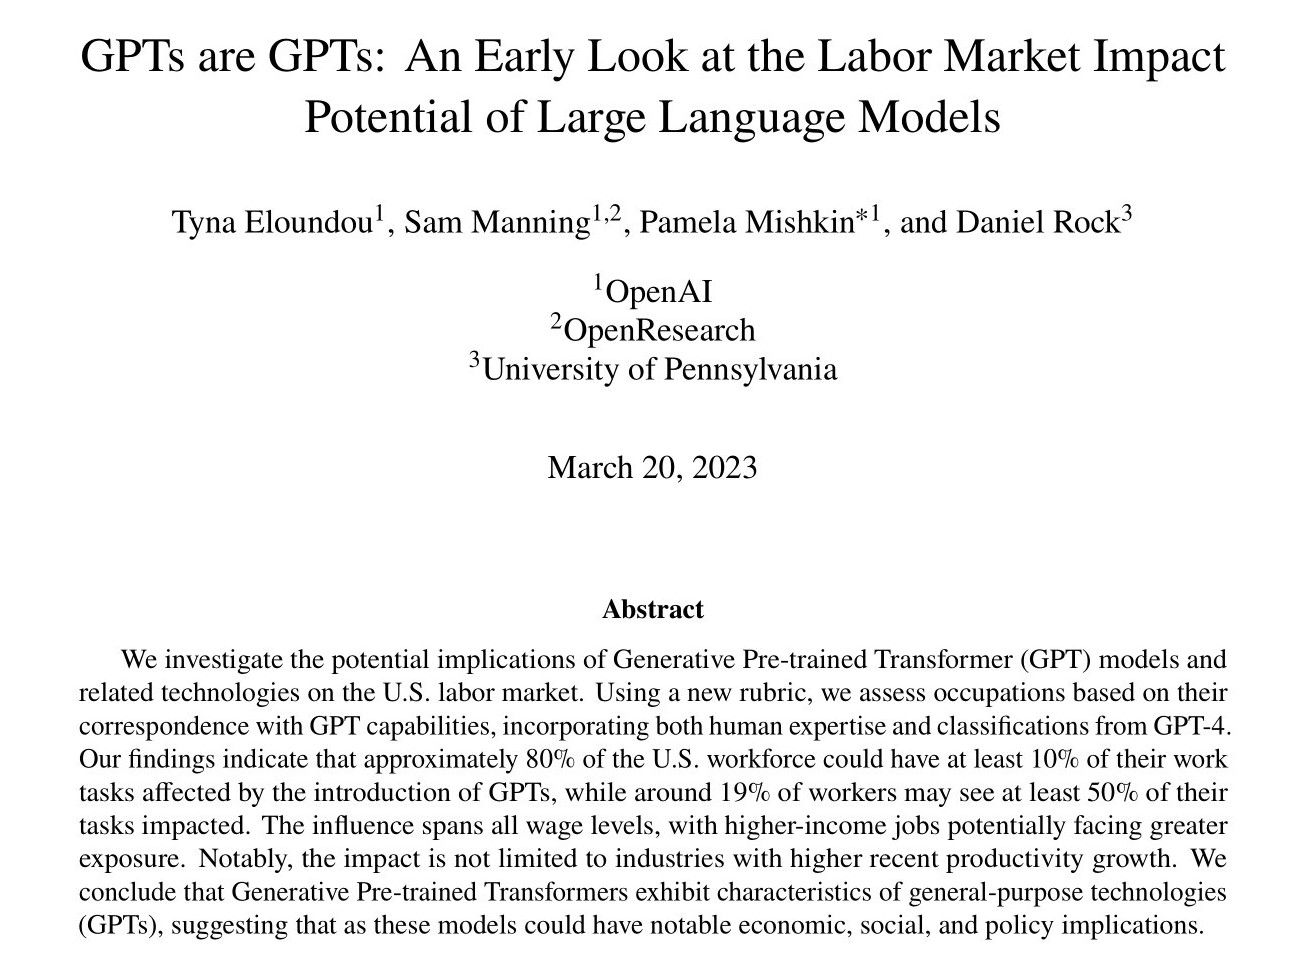 GPTs are GPTs: An Early Look at the Labor Market Impact Potential of Large Language Models